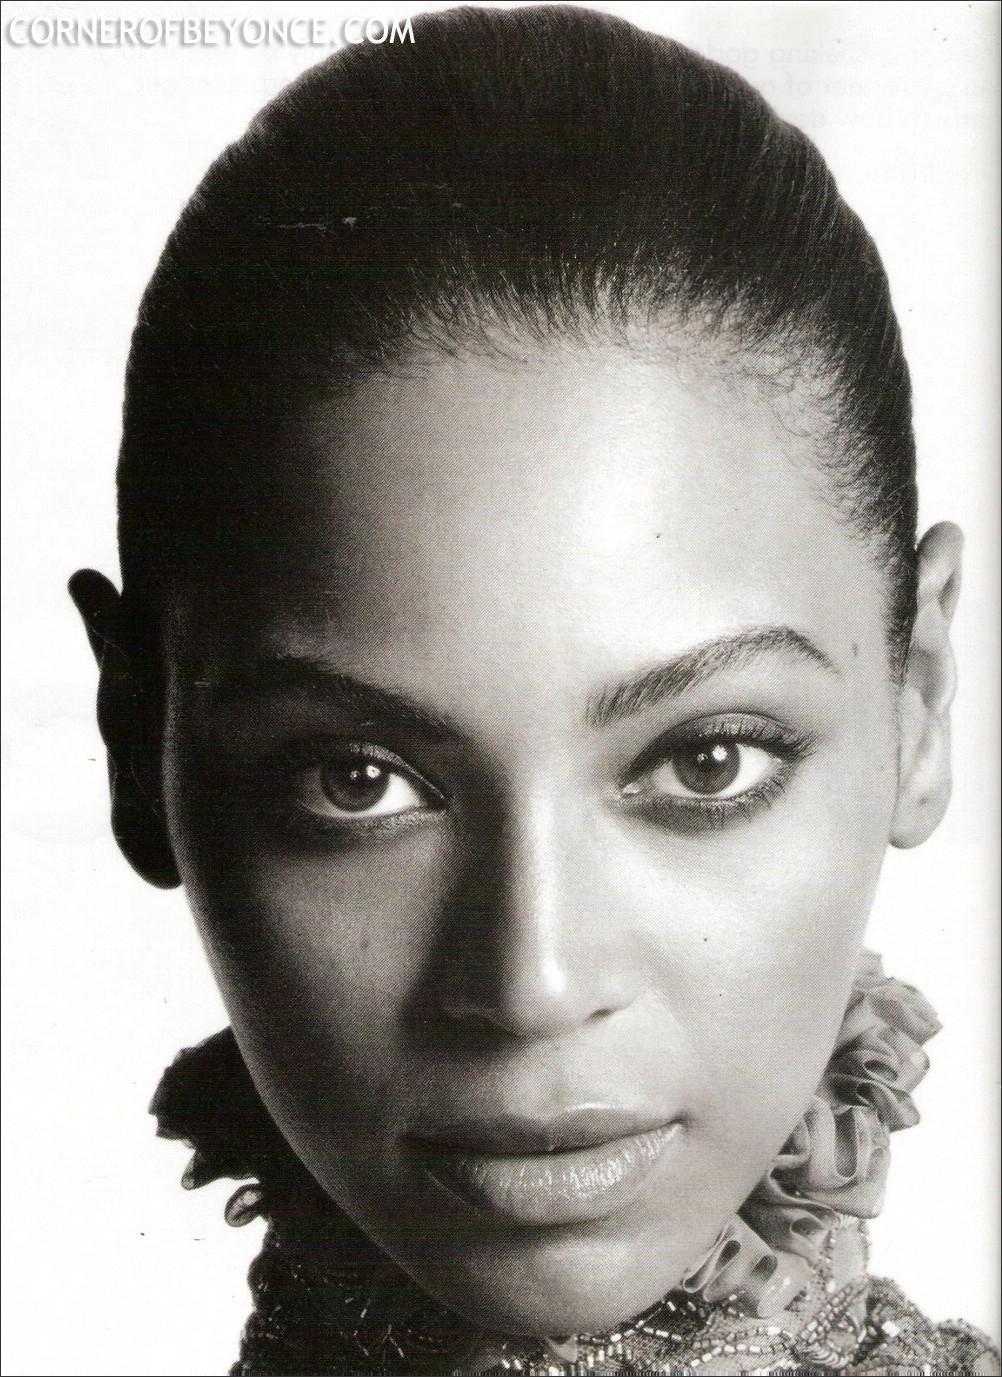 Beyonce Knowles photo 258 of 7935 pics, wallpaper - photo #62060 ...